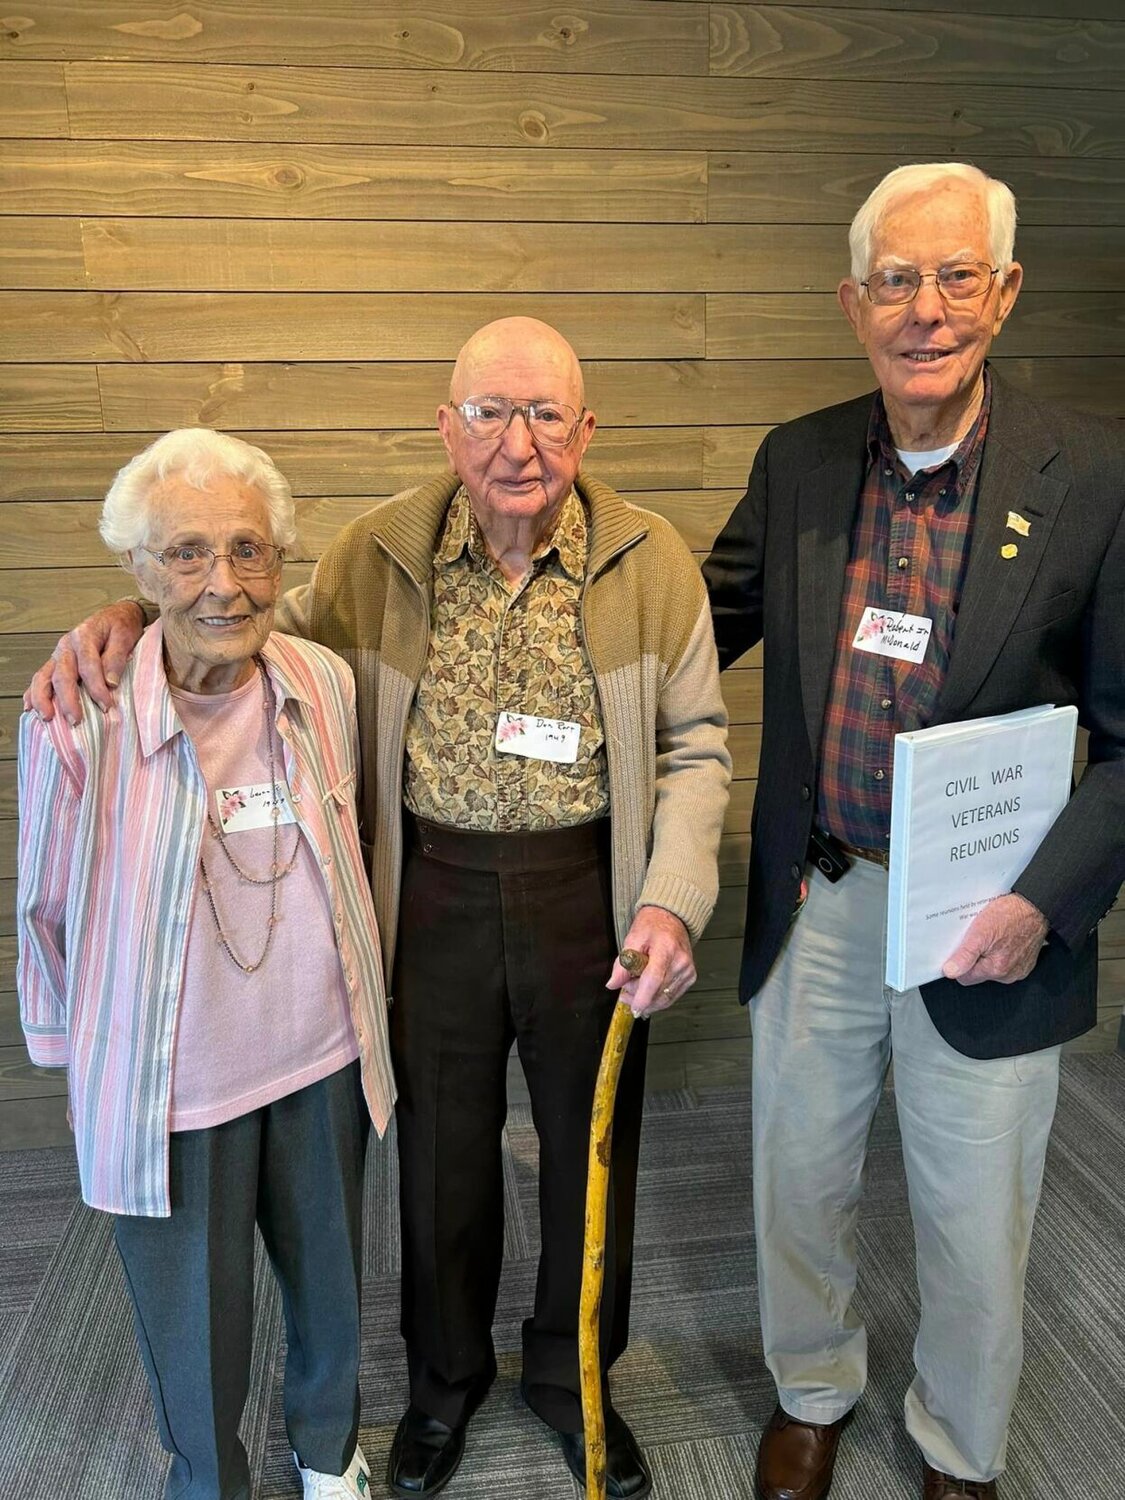 Pictured are members of the Class of 1949 who attended the Alumni Luncheon (left to right): Leona Rost, Don Rost and Robert McDonald Jr.